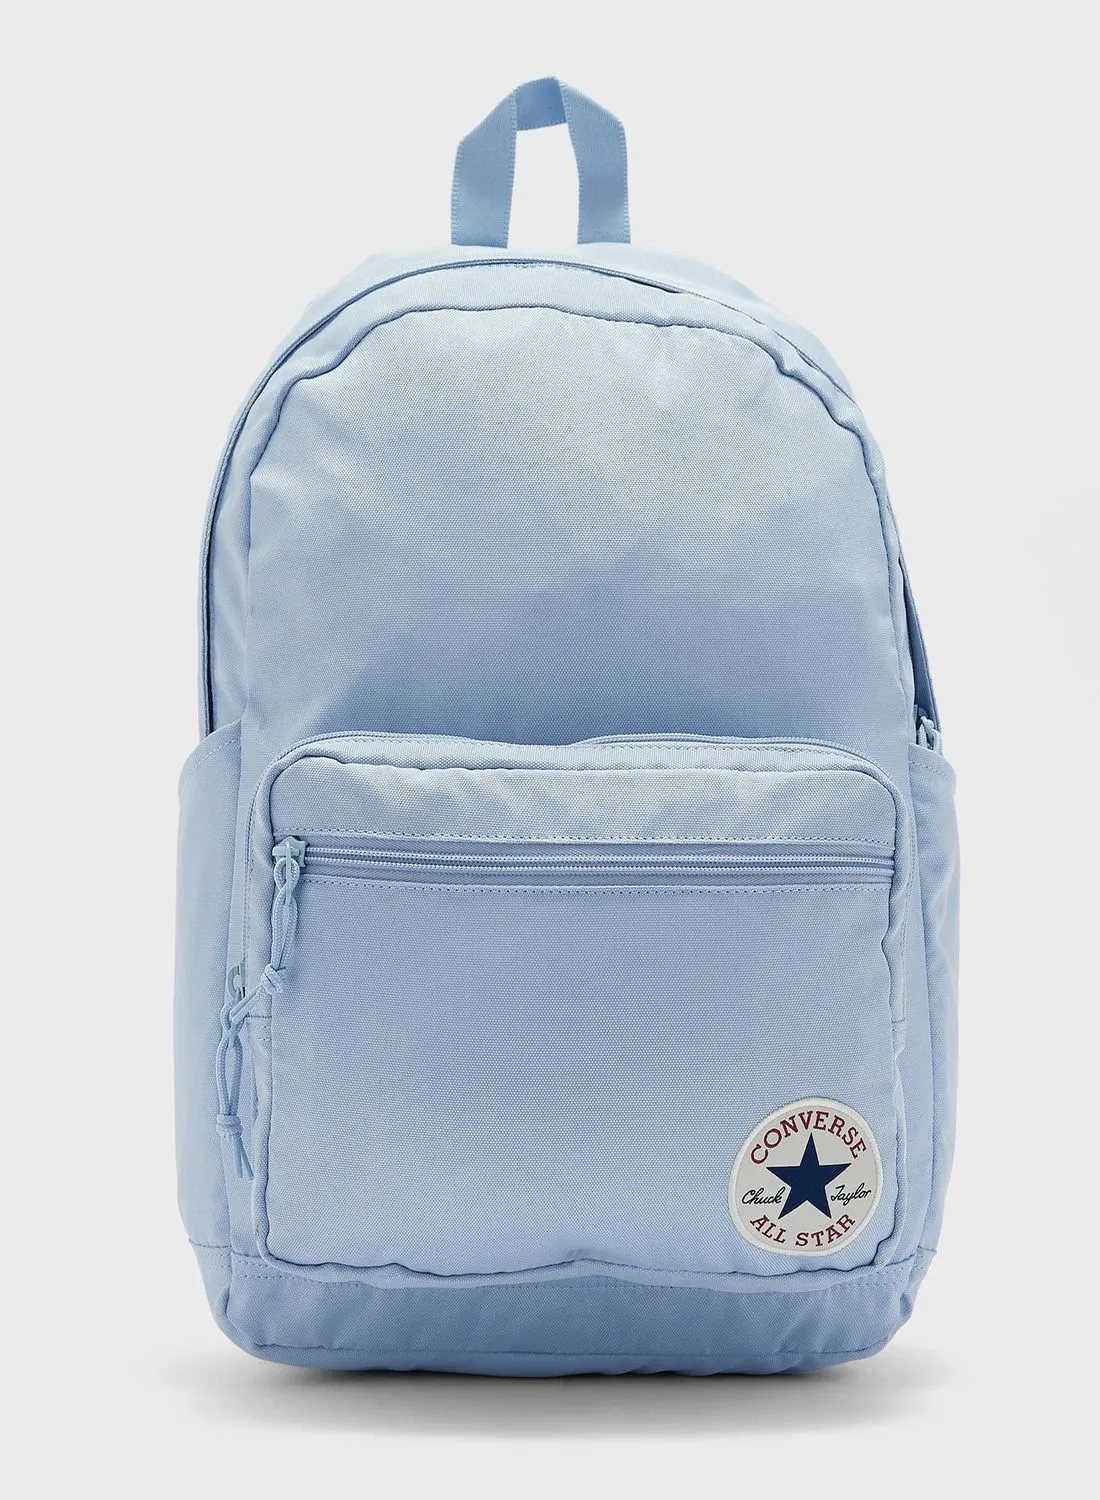 CONVERSE Go 2 Backpack